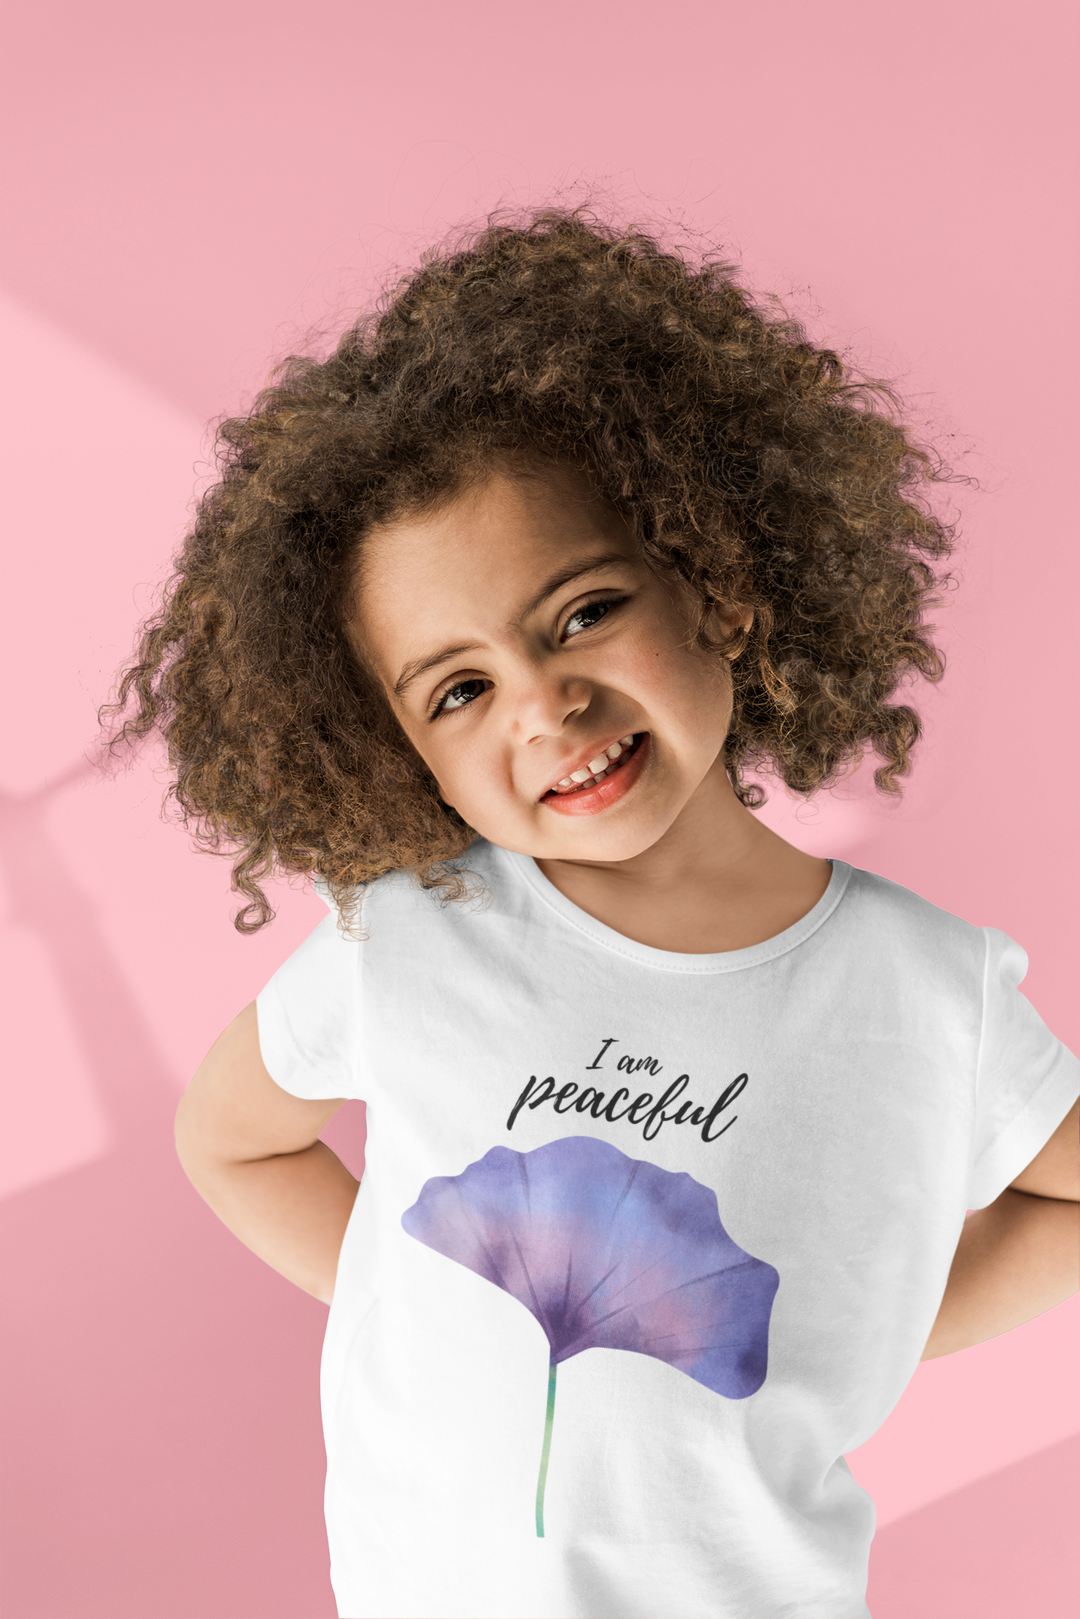 I am peaceful. Short shirt sleeve t shirt for your toddler and kids. - TeesForToddlersandKids -  t-shirt - positive - i-am-peaceful-shirt-sleeve-t-shirt